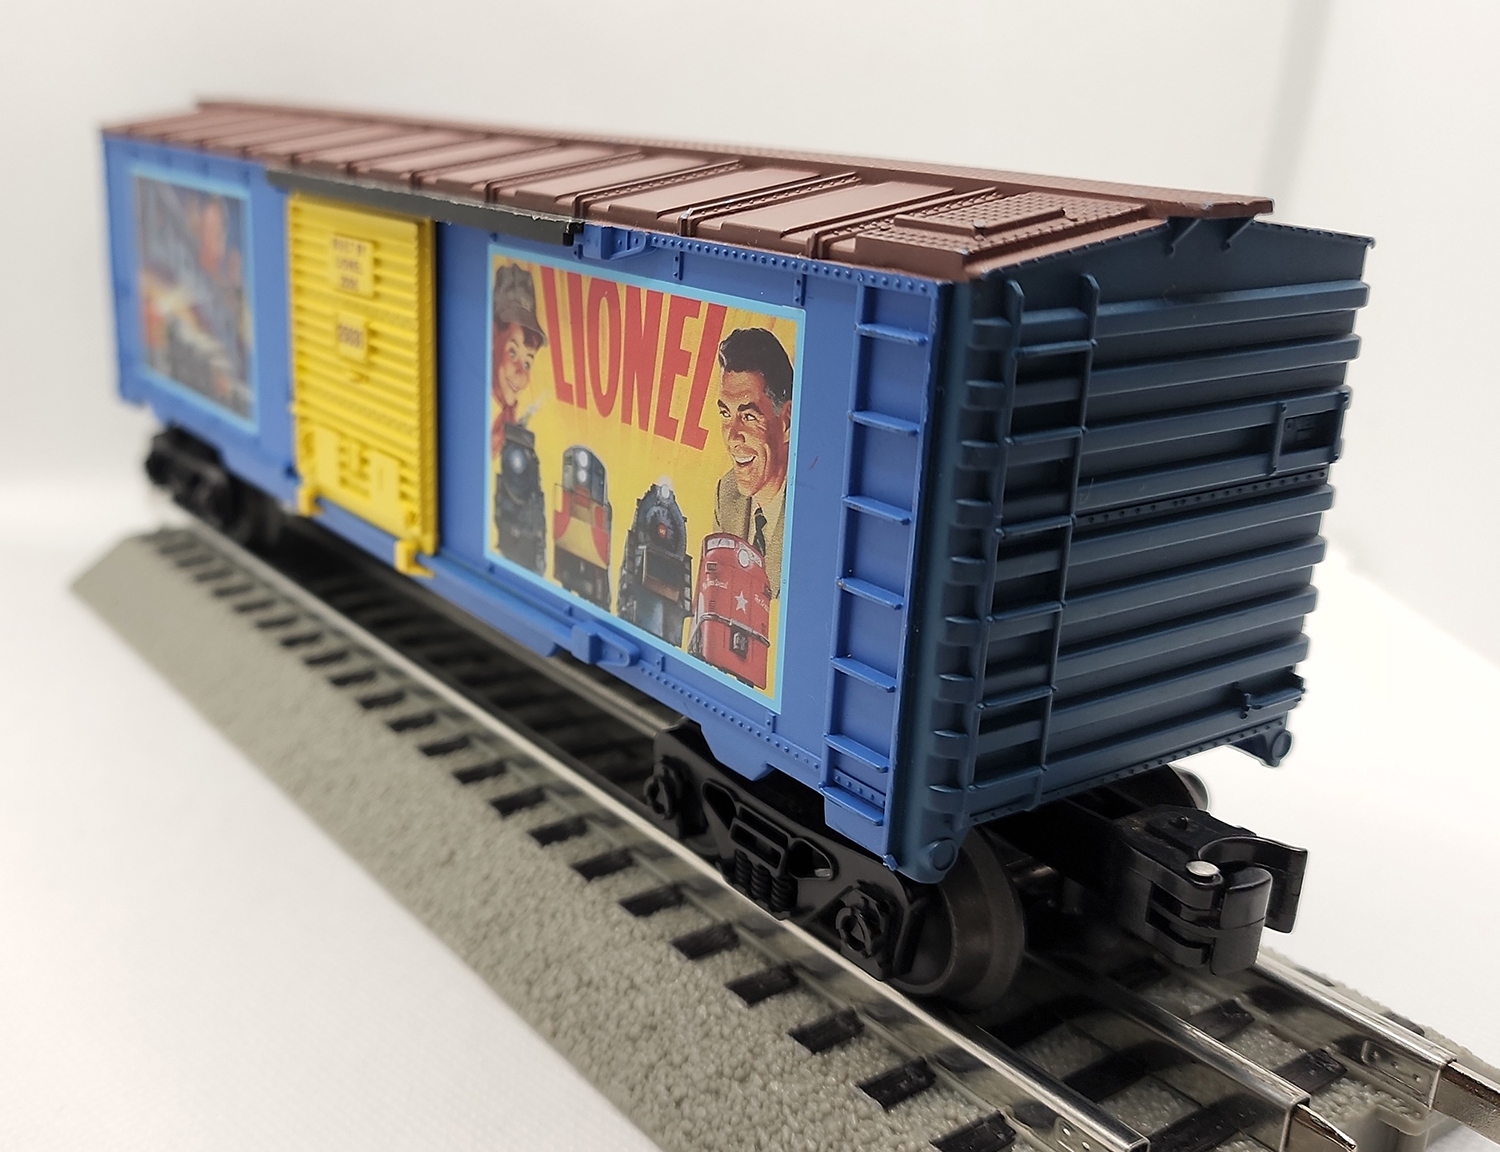 3rd view of the Lionel 2006 Billboard Car #25030 in my O-scale Collection